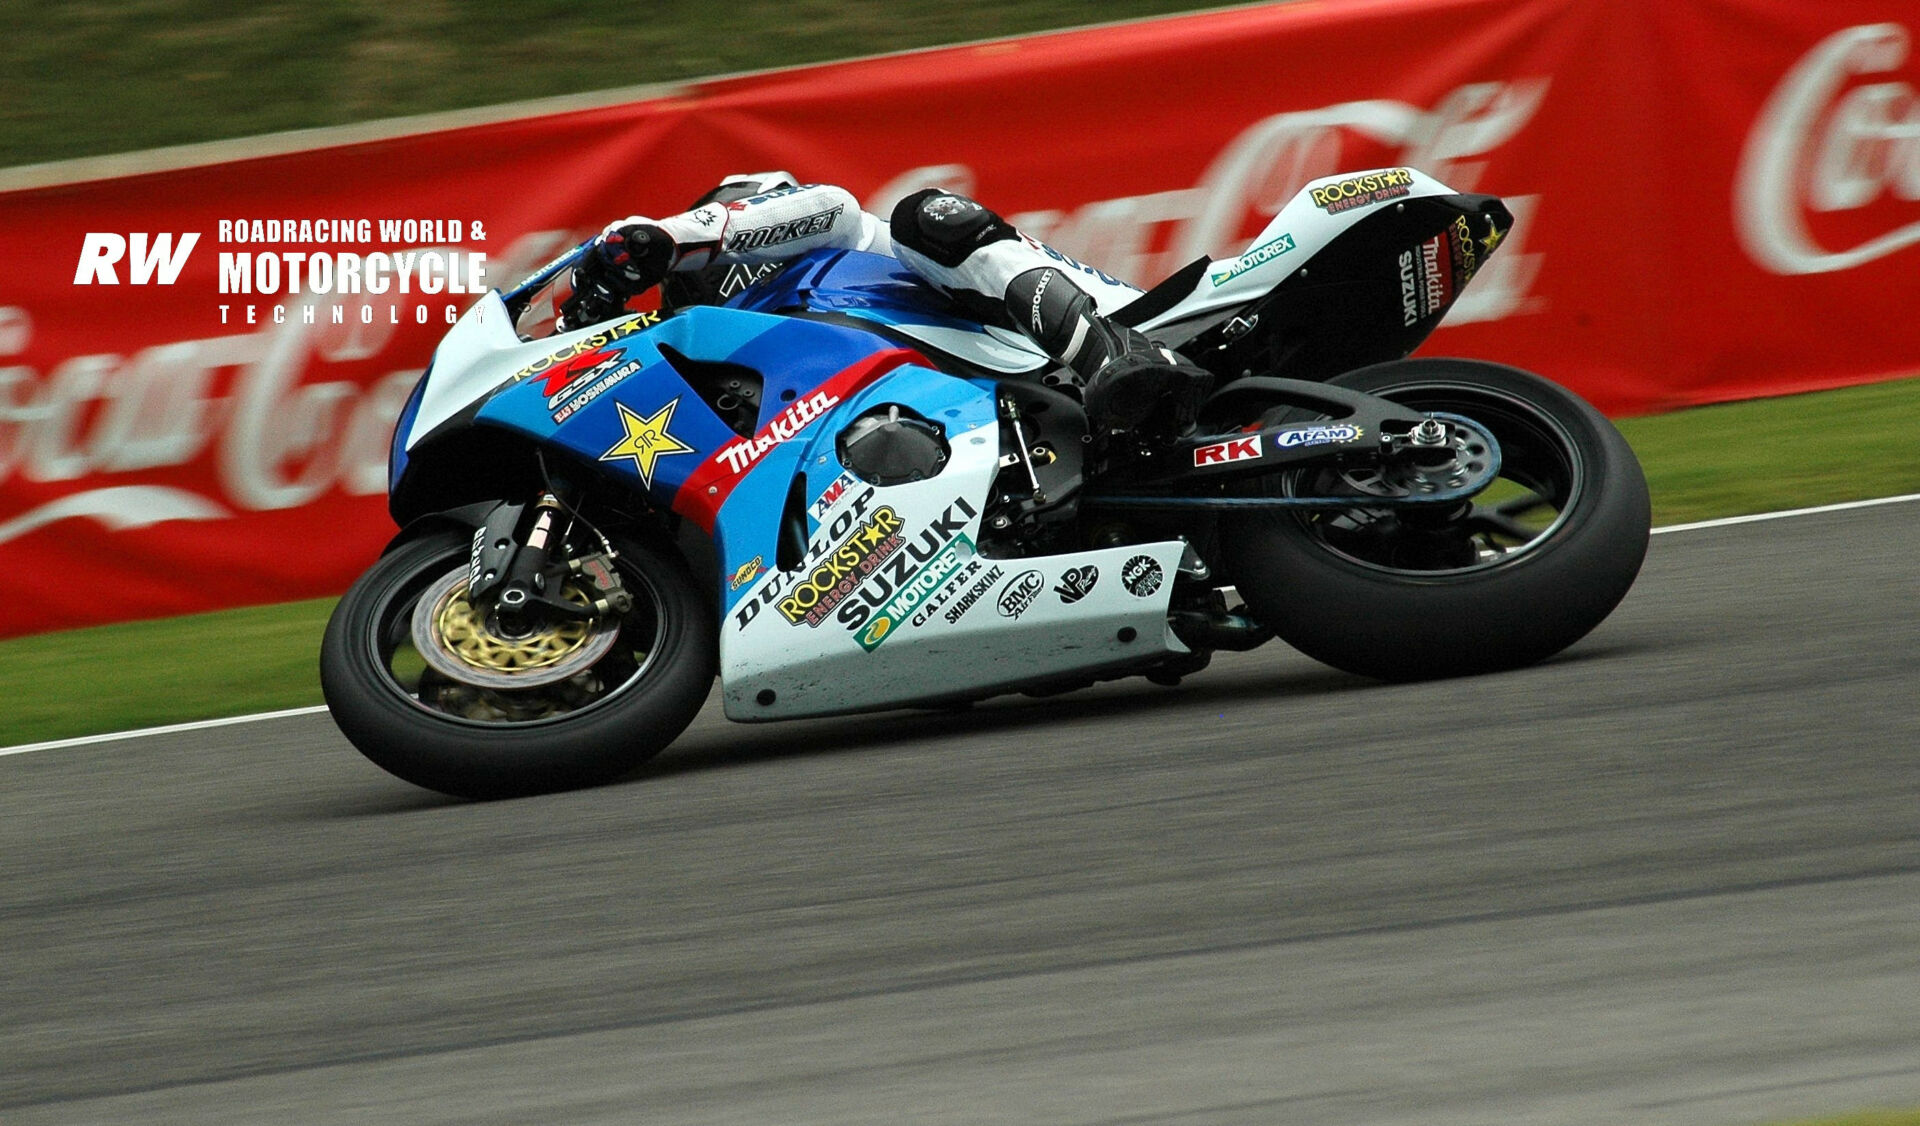 Mat Mladin is among the 2024 nominees for the AMA Motorcycle Hall of Fame. Here, he's seen at speed at Barber Motorsports Park in 2009, his last year of AMA Superbike competition. Photo by David Swarts.